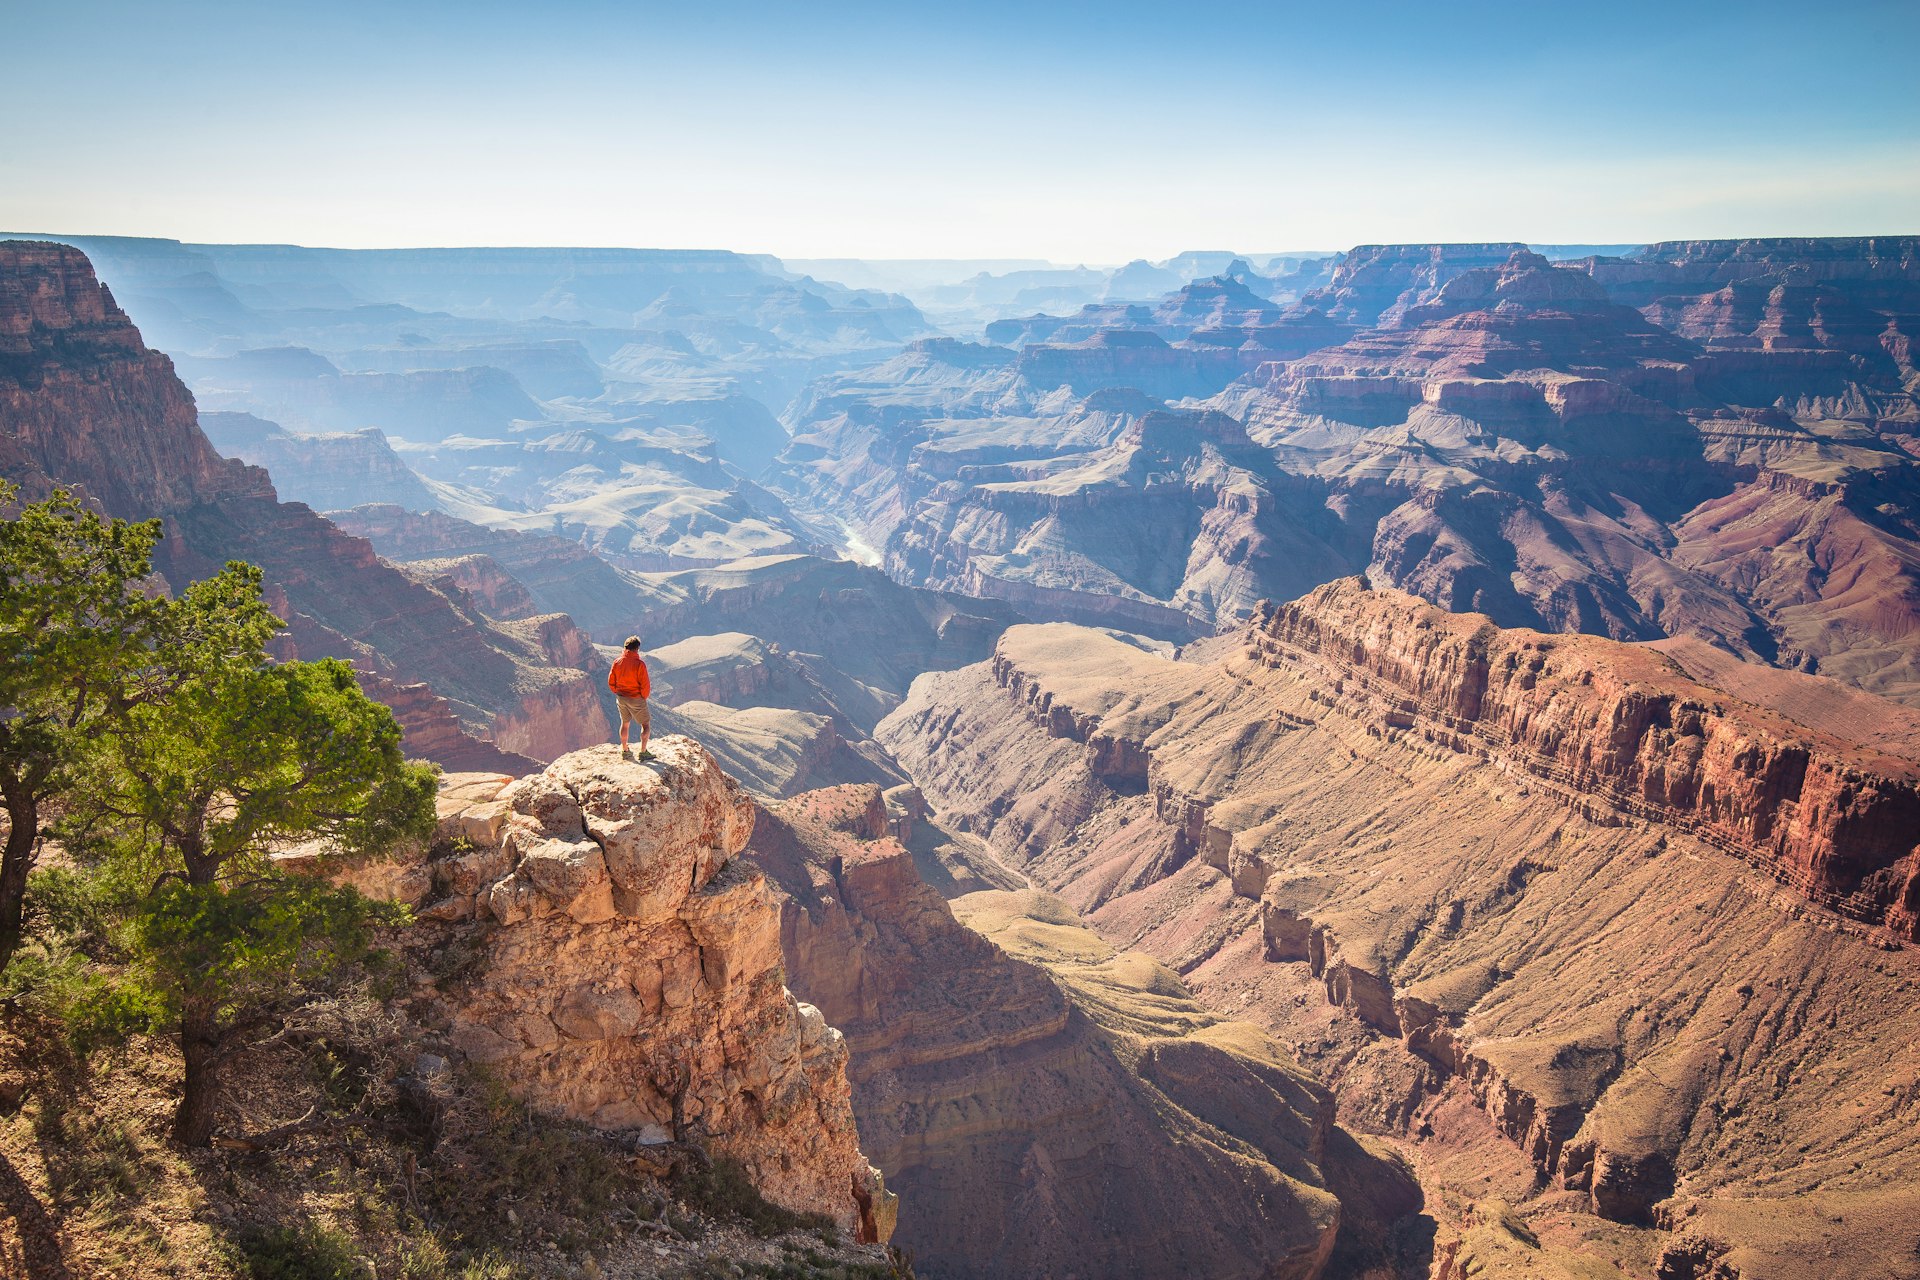 A solo figure stands on a rock looking out across a vast canyon as the sun shines down